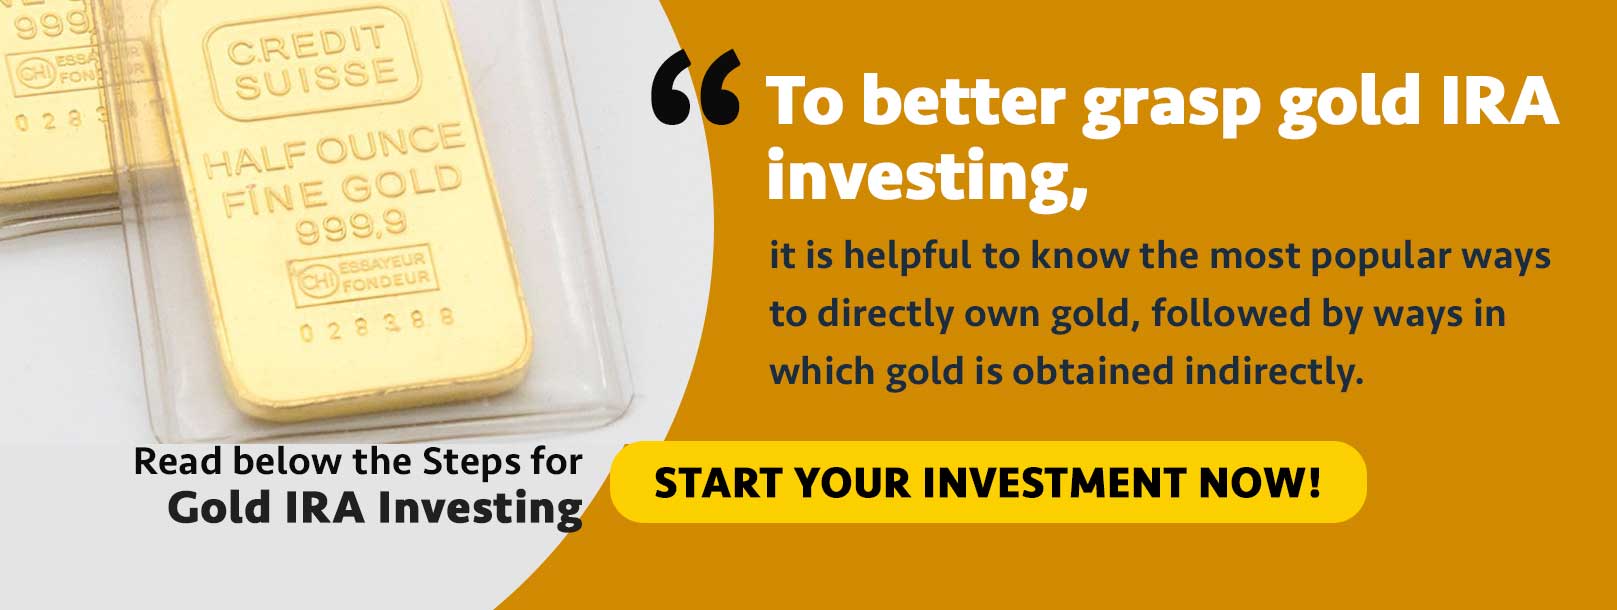 Fall In Love With investing in gold and silver